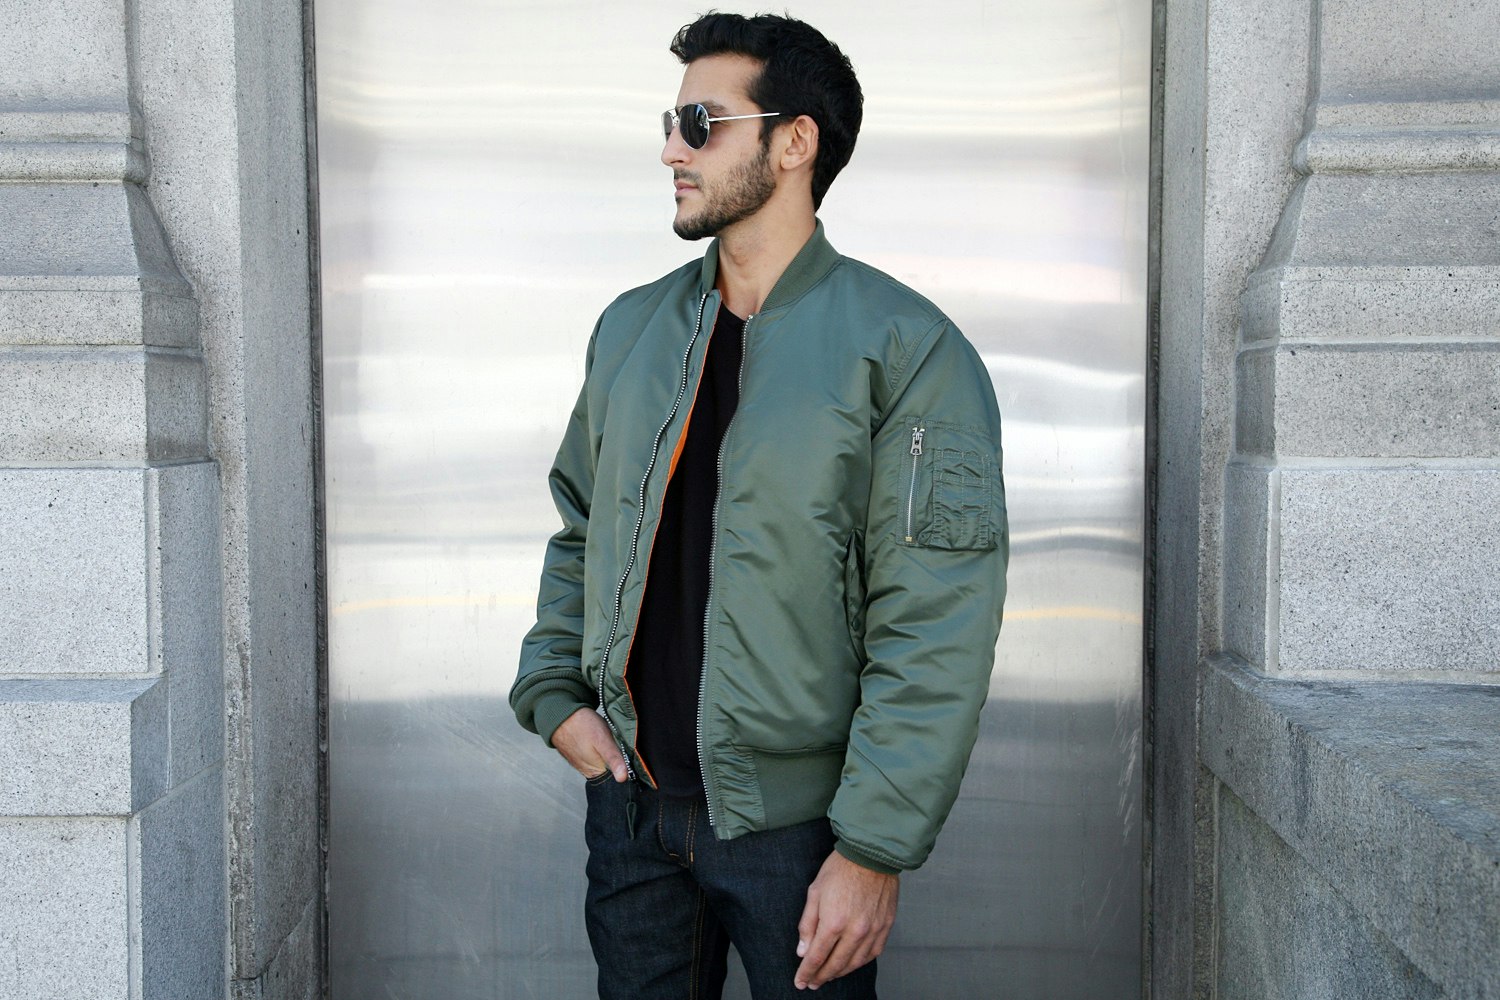 STYLE] FERINO DEBUTS NEW PREMIUM MA-1 BOMBER JACKET ARRIVAL FOR ITS FIRST  RELEASE OF THE YEAR. - Viper Mag